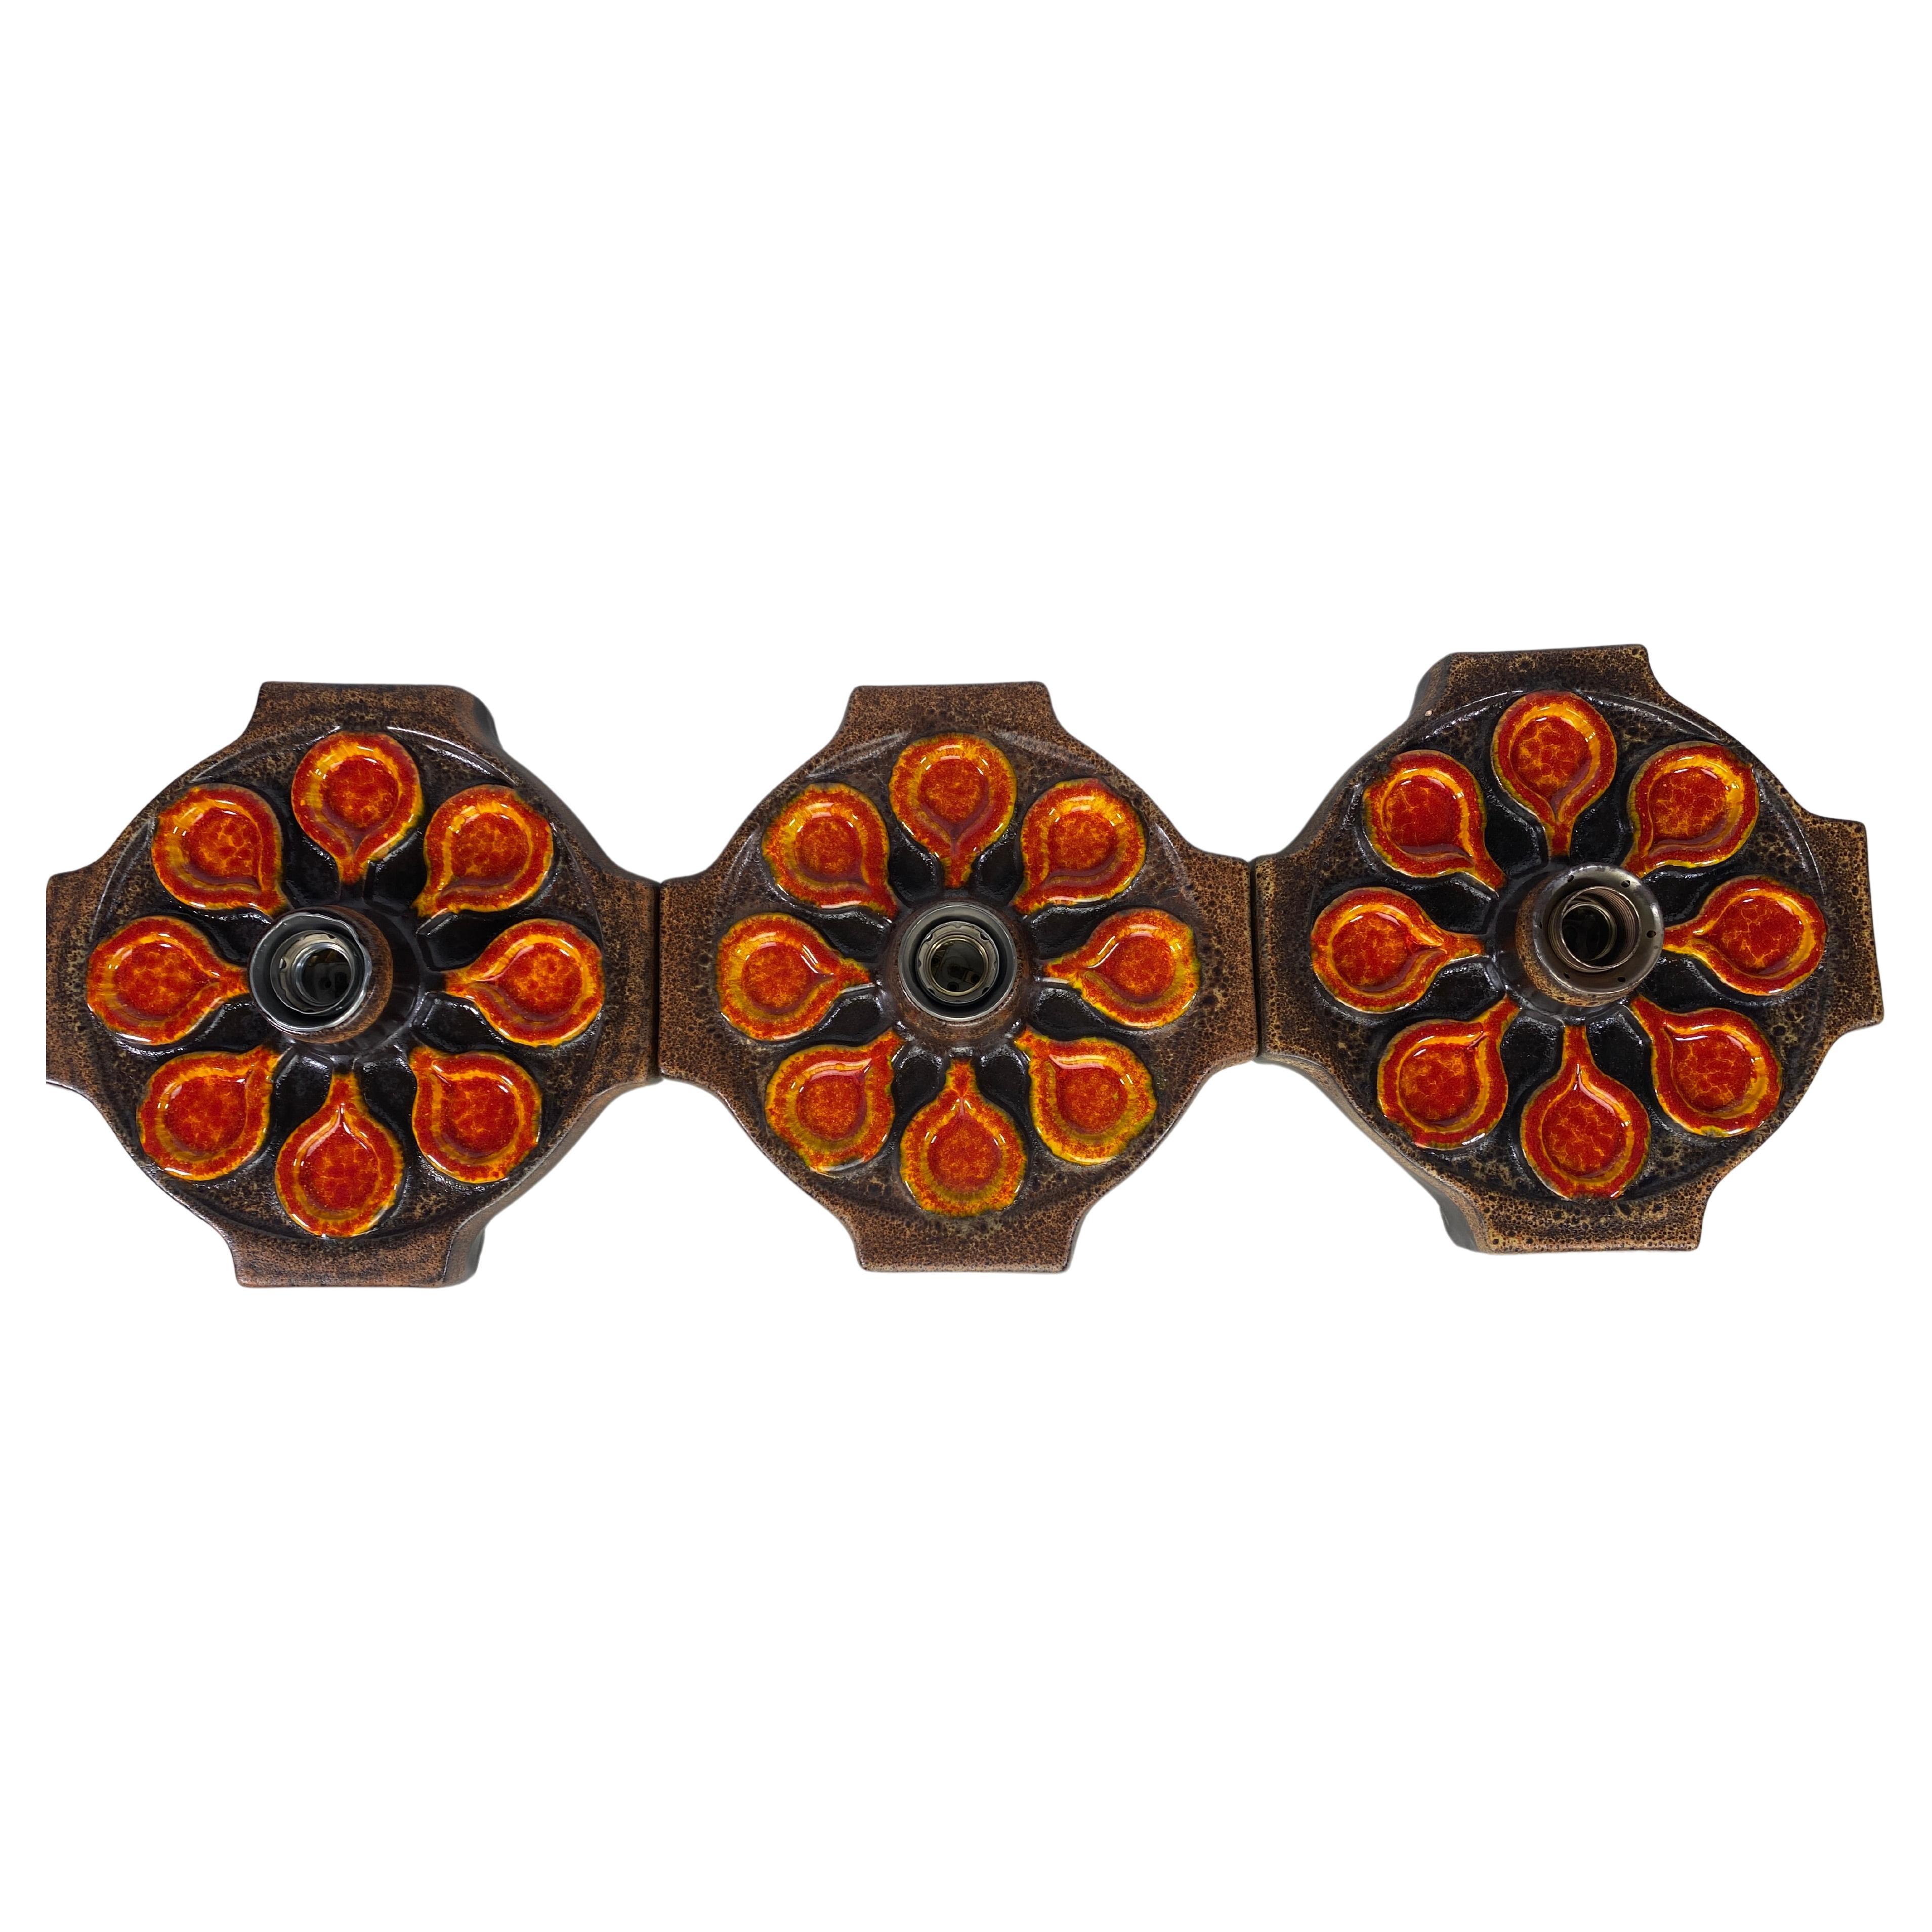 Characteristic Fat Lava ceramic wall lamps. Beautiful different tones of brown and orange colored glazed ceramic. This set of 3 wall-lamps can be styled in many different ways in your interior. They give a warm look and feel. 

The patterns on the